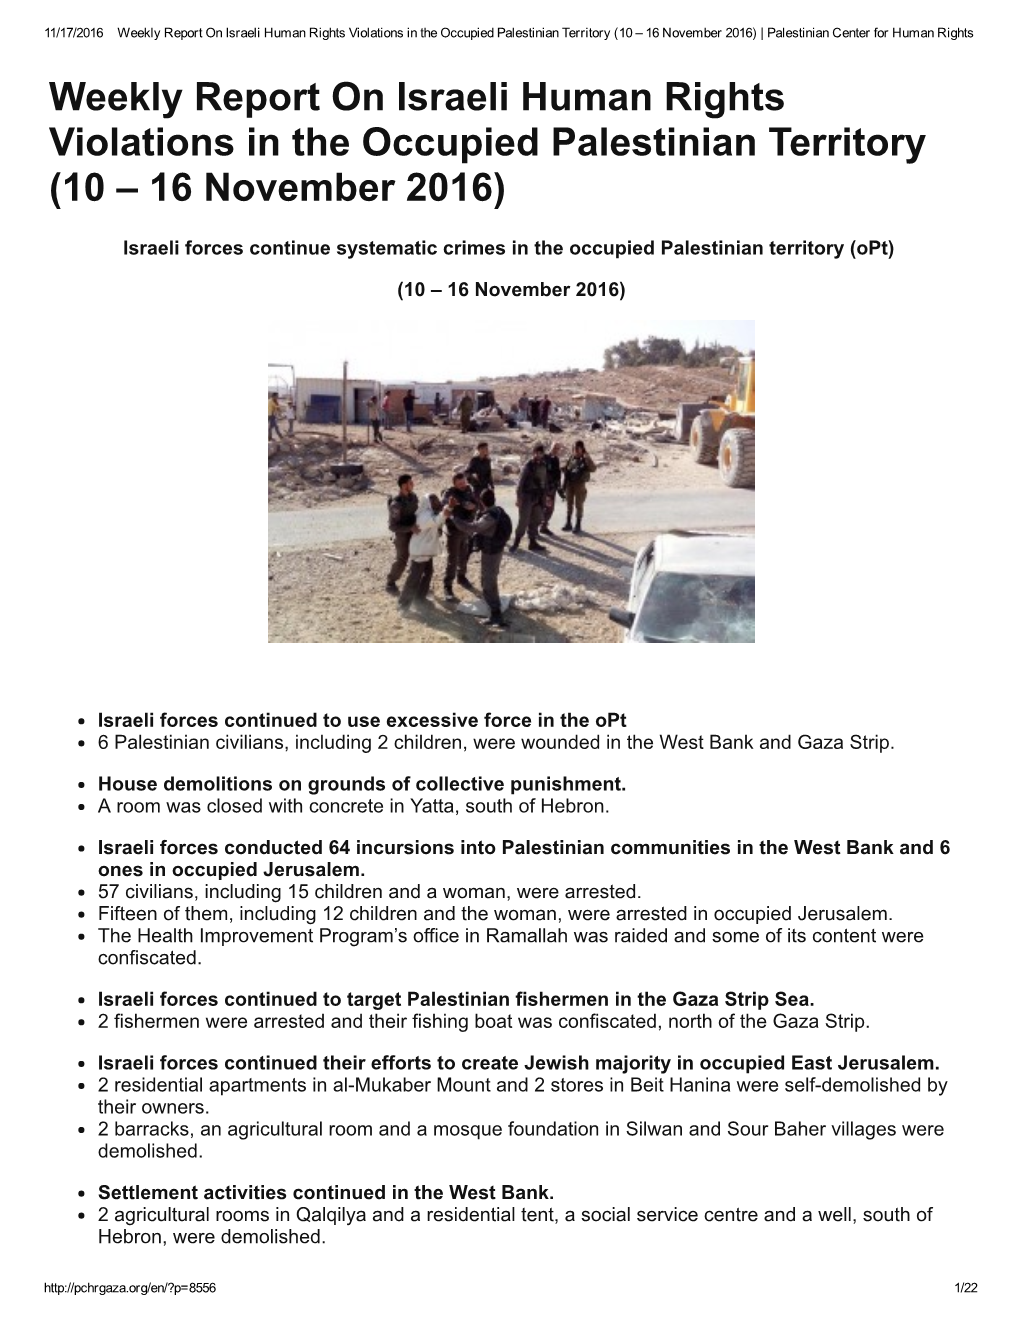 Weekly Report on Israeli Human Rights Violations in the Occupied Palestinian Territory (10 – 16 November 2016) | Palestinian Center for Human Rights